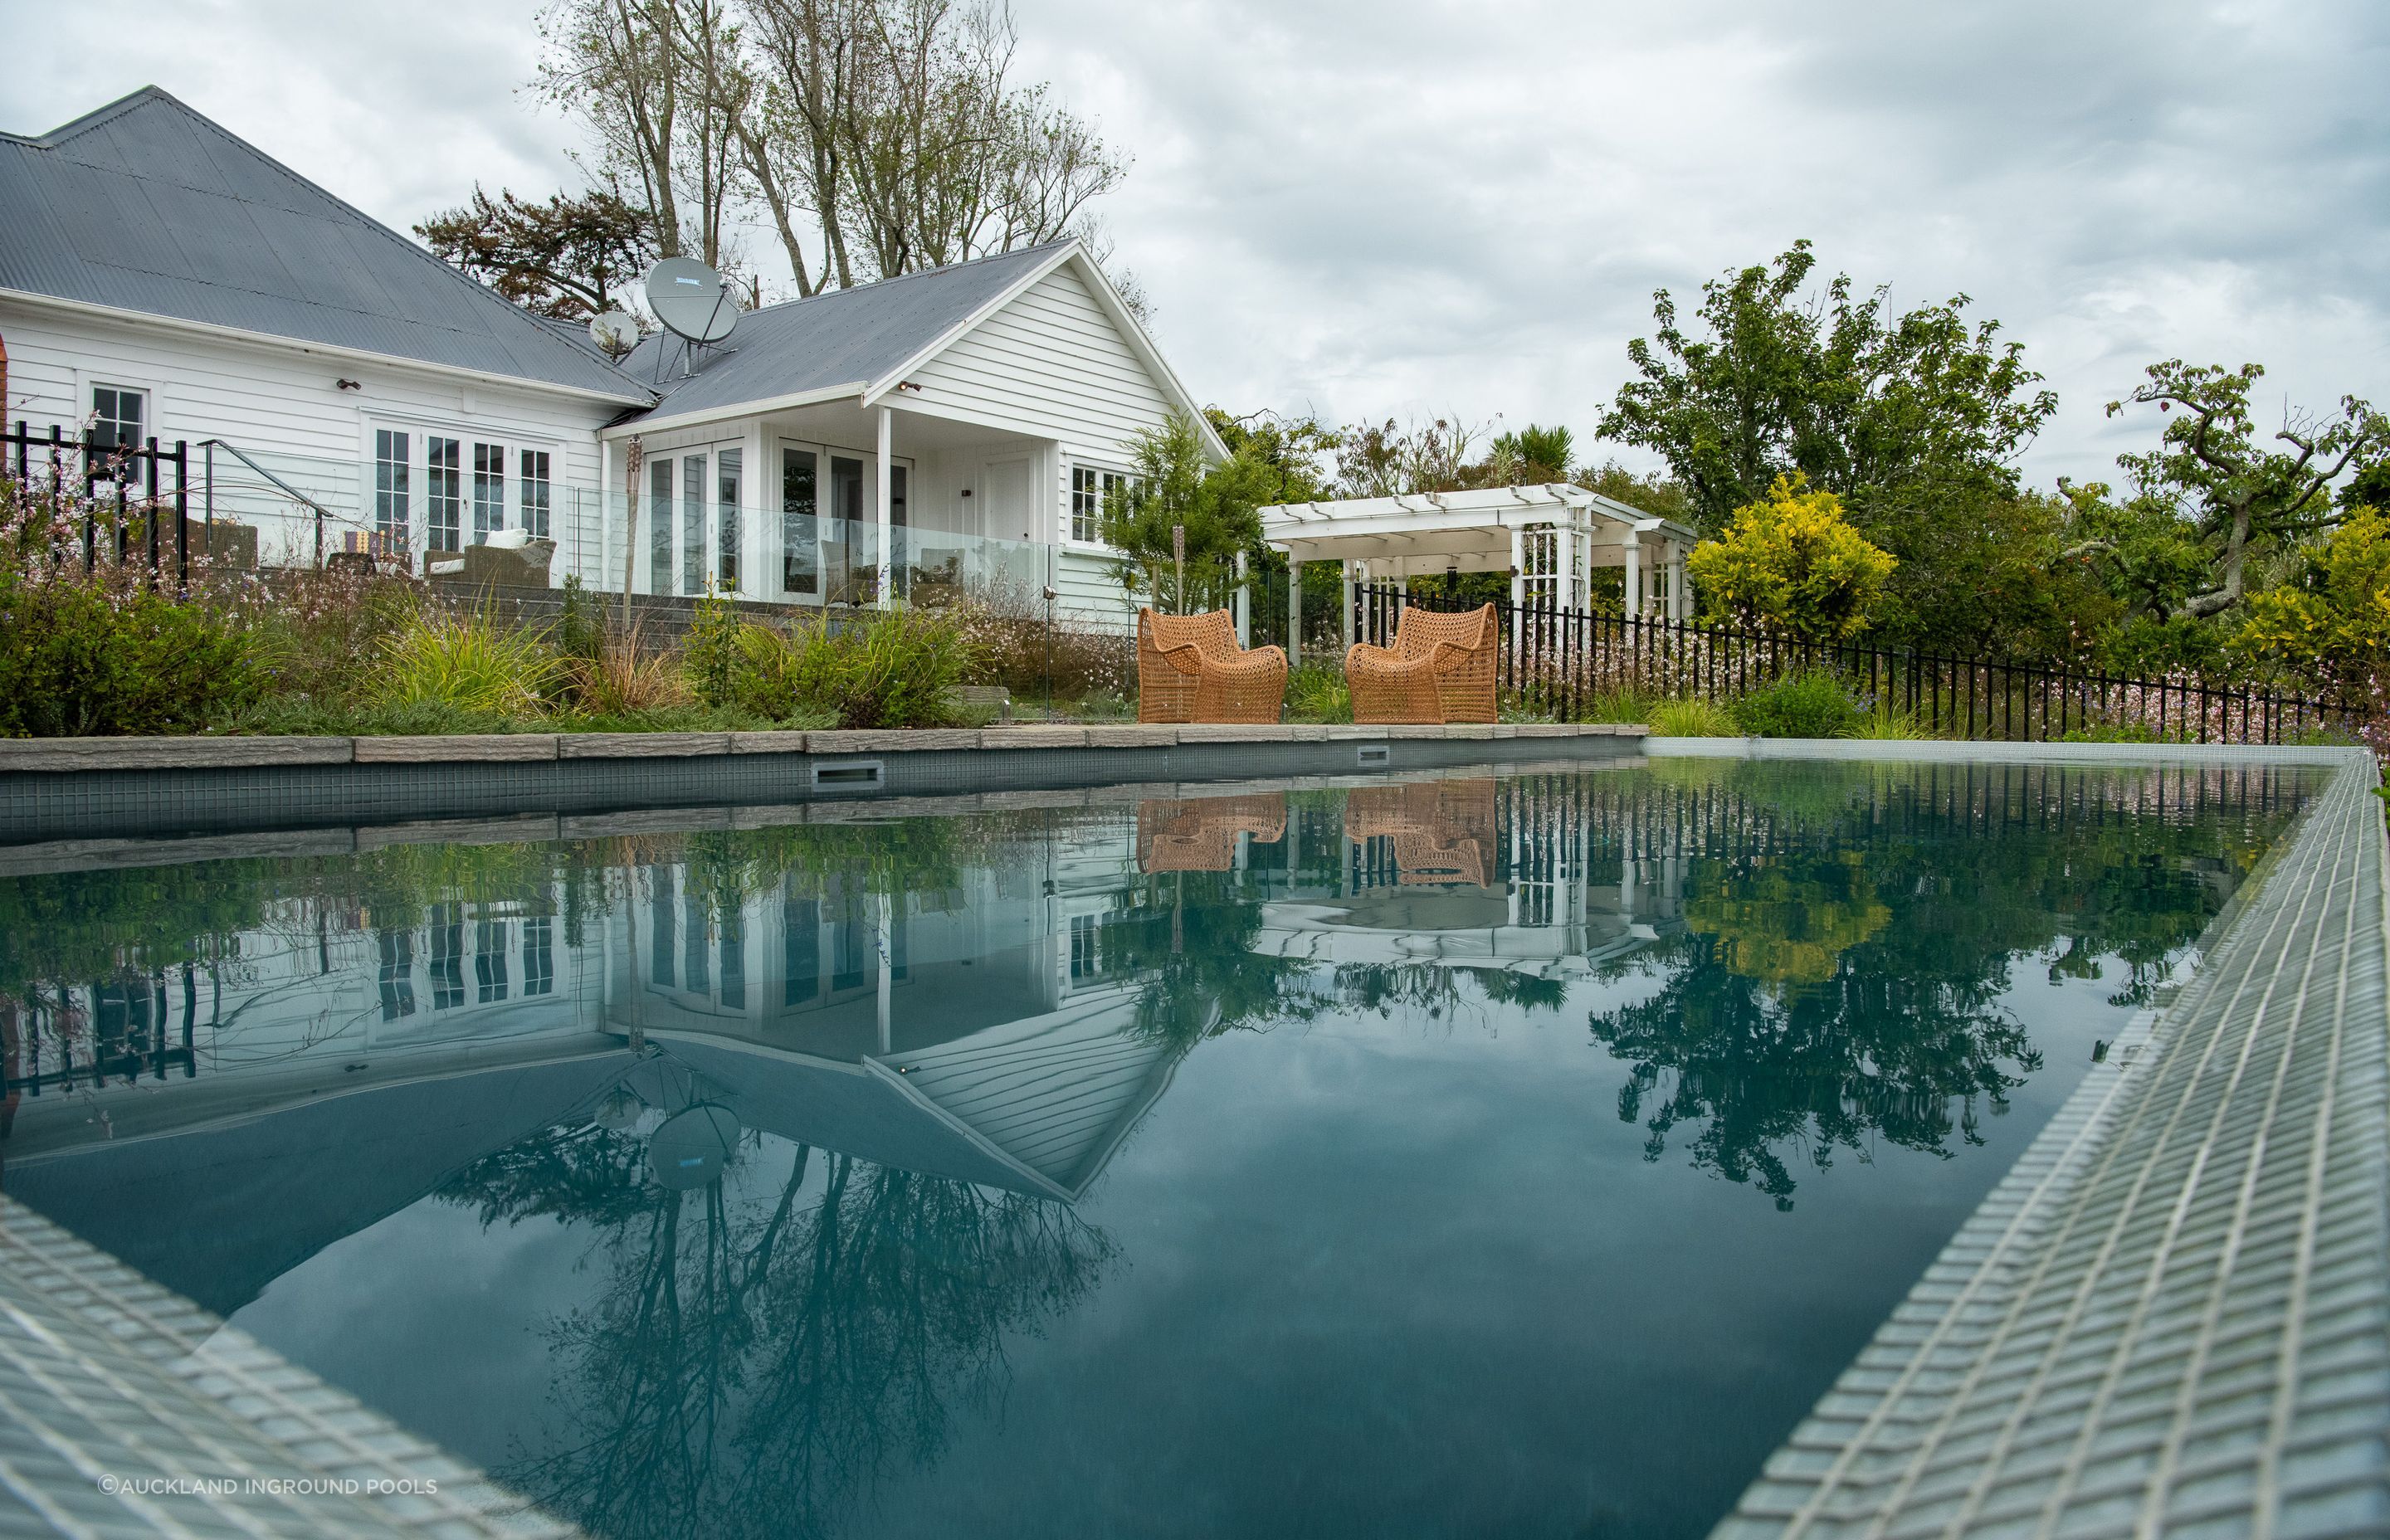 A cleverly designed pool and garden to meet the owners design requirements